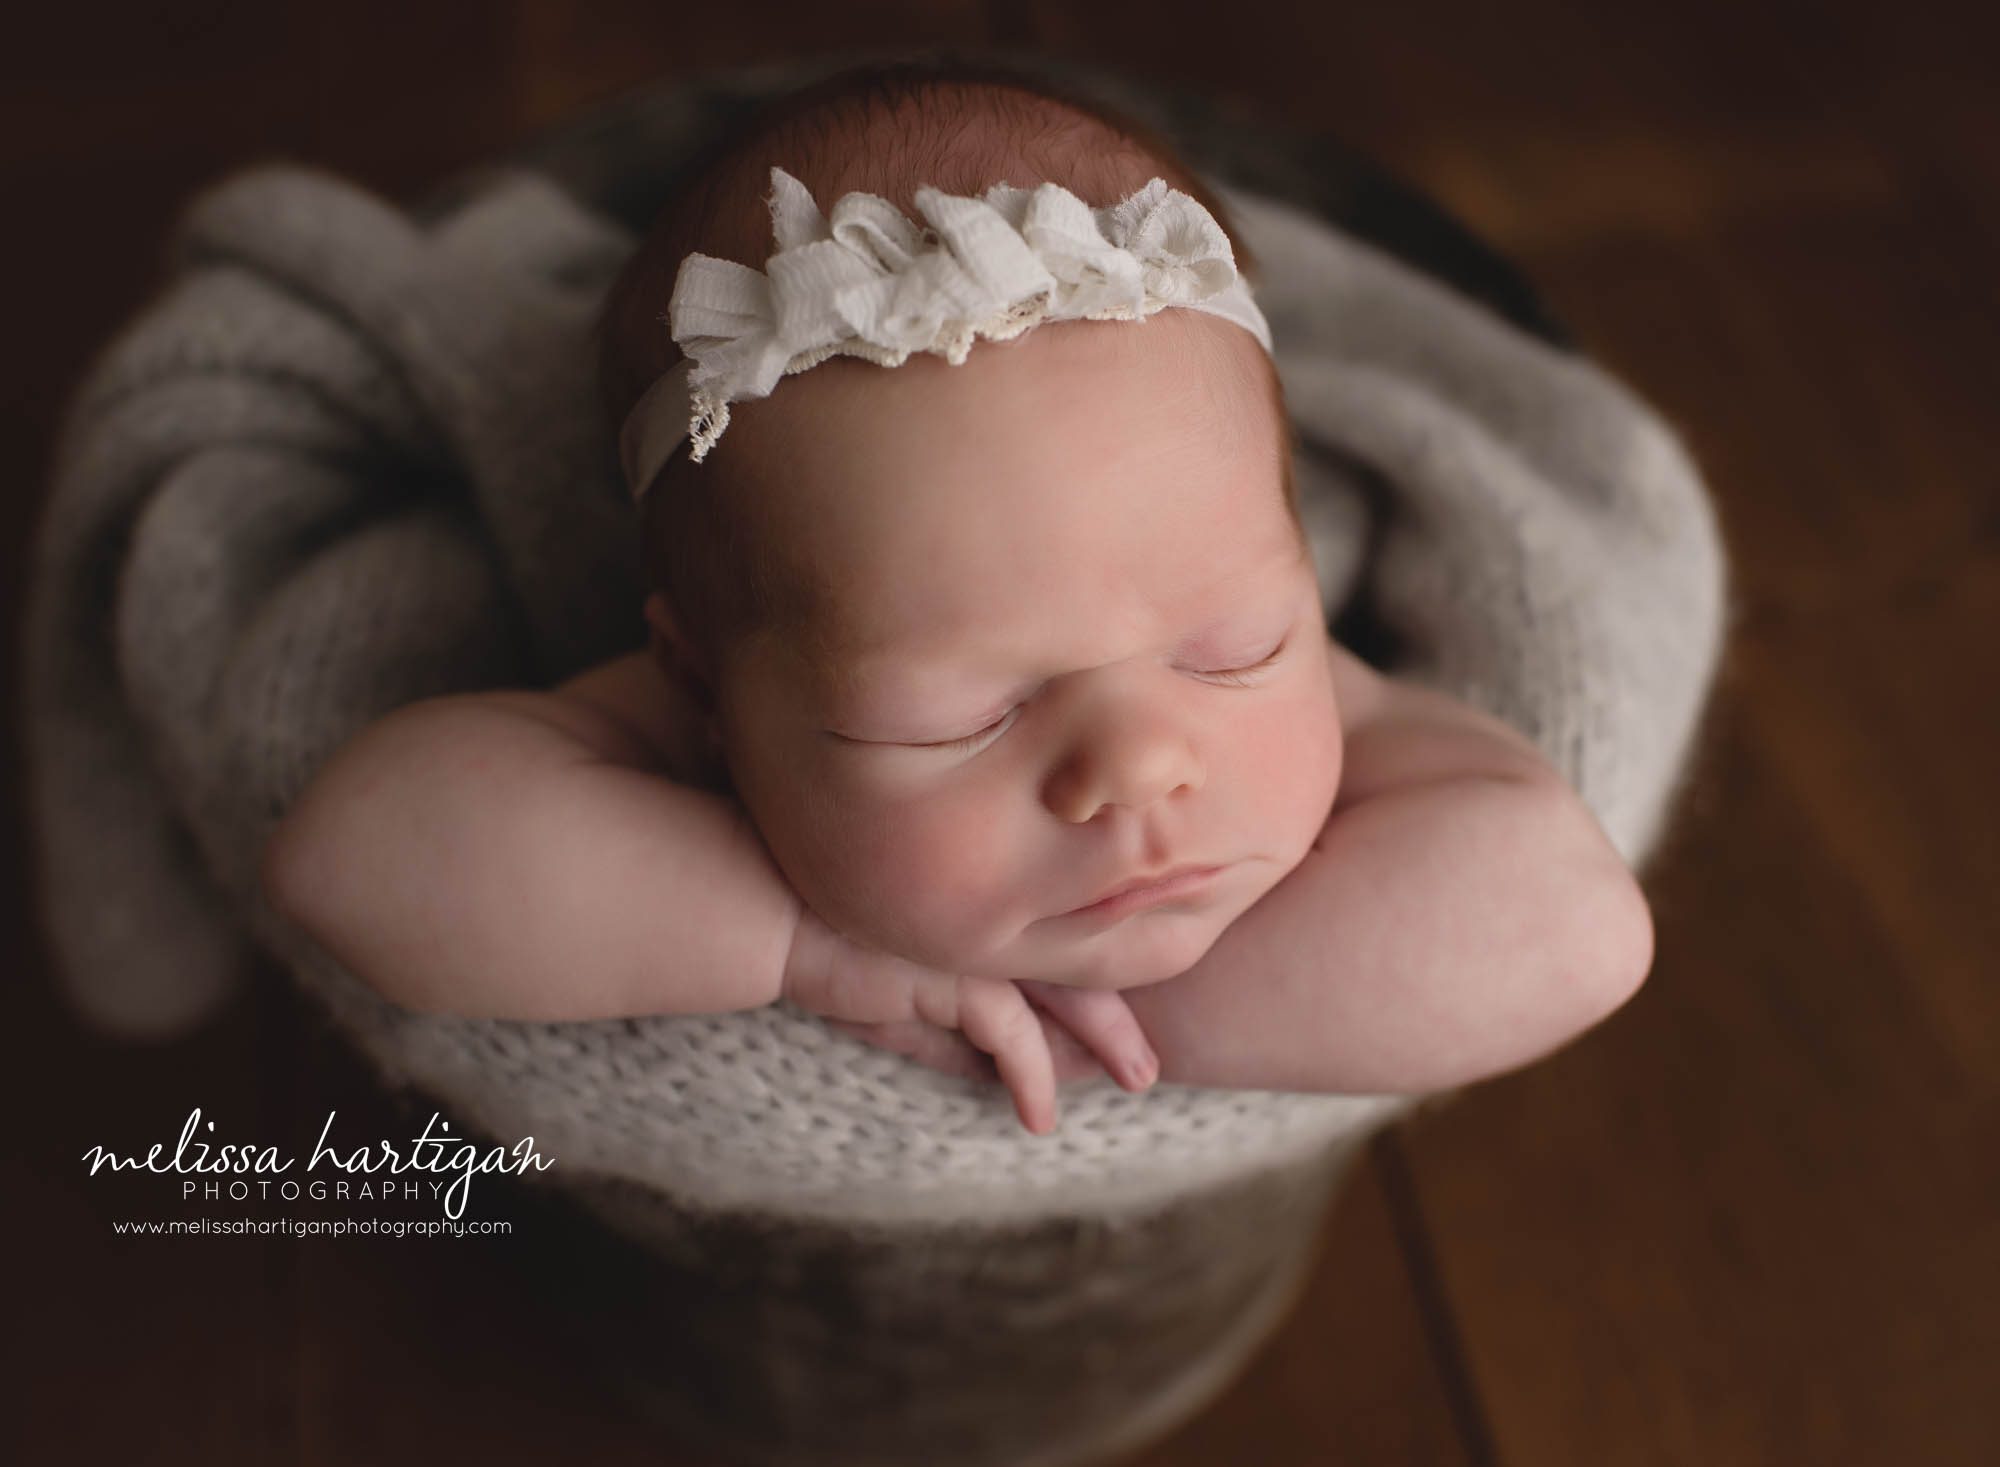 Newborn baby girl posed in bucket with chin on hands bow headband